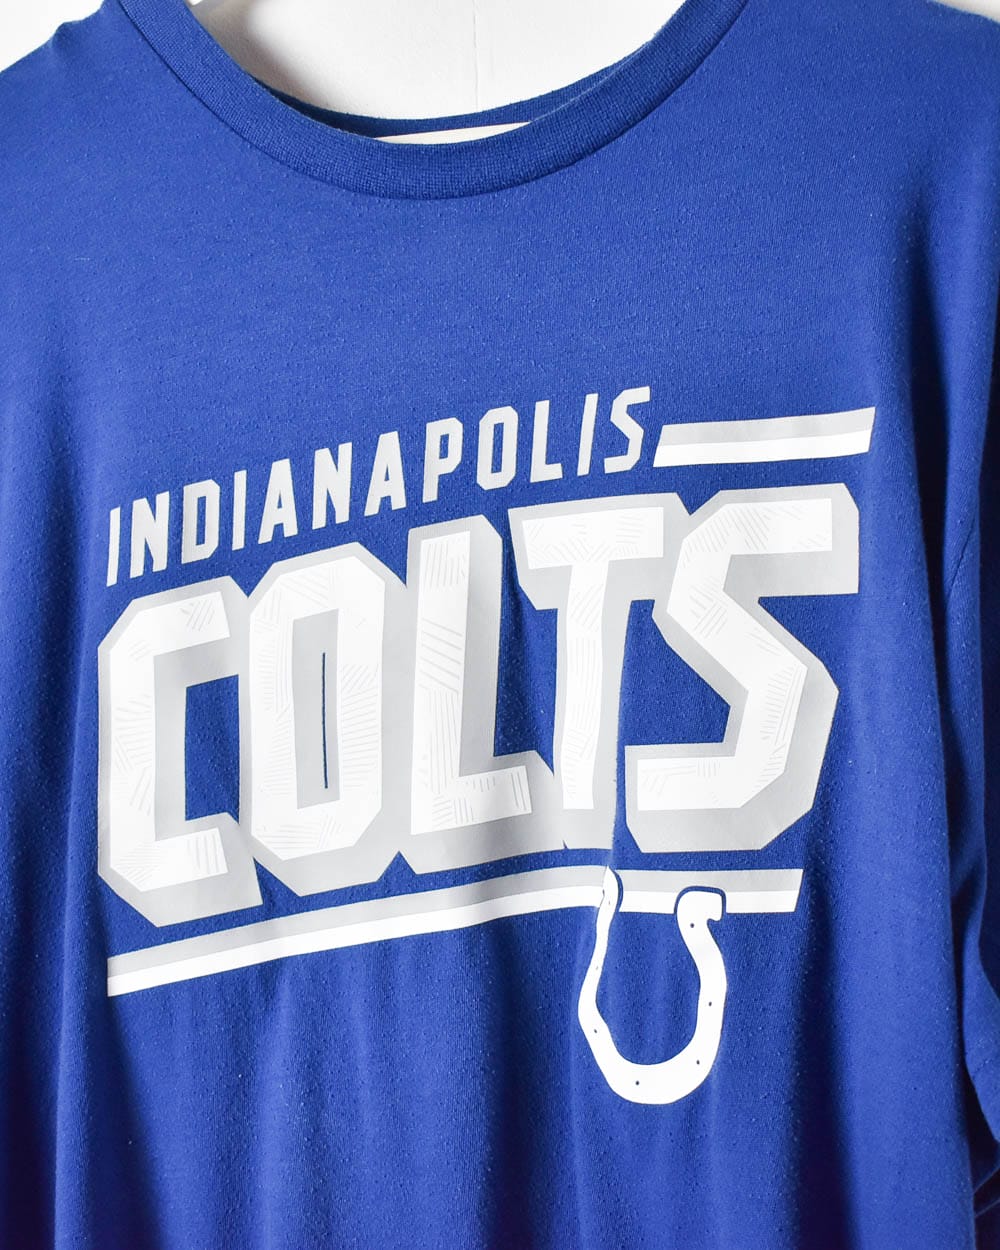 Blue Indianapolis Colts T-Shirt - Large